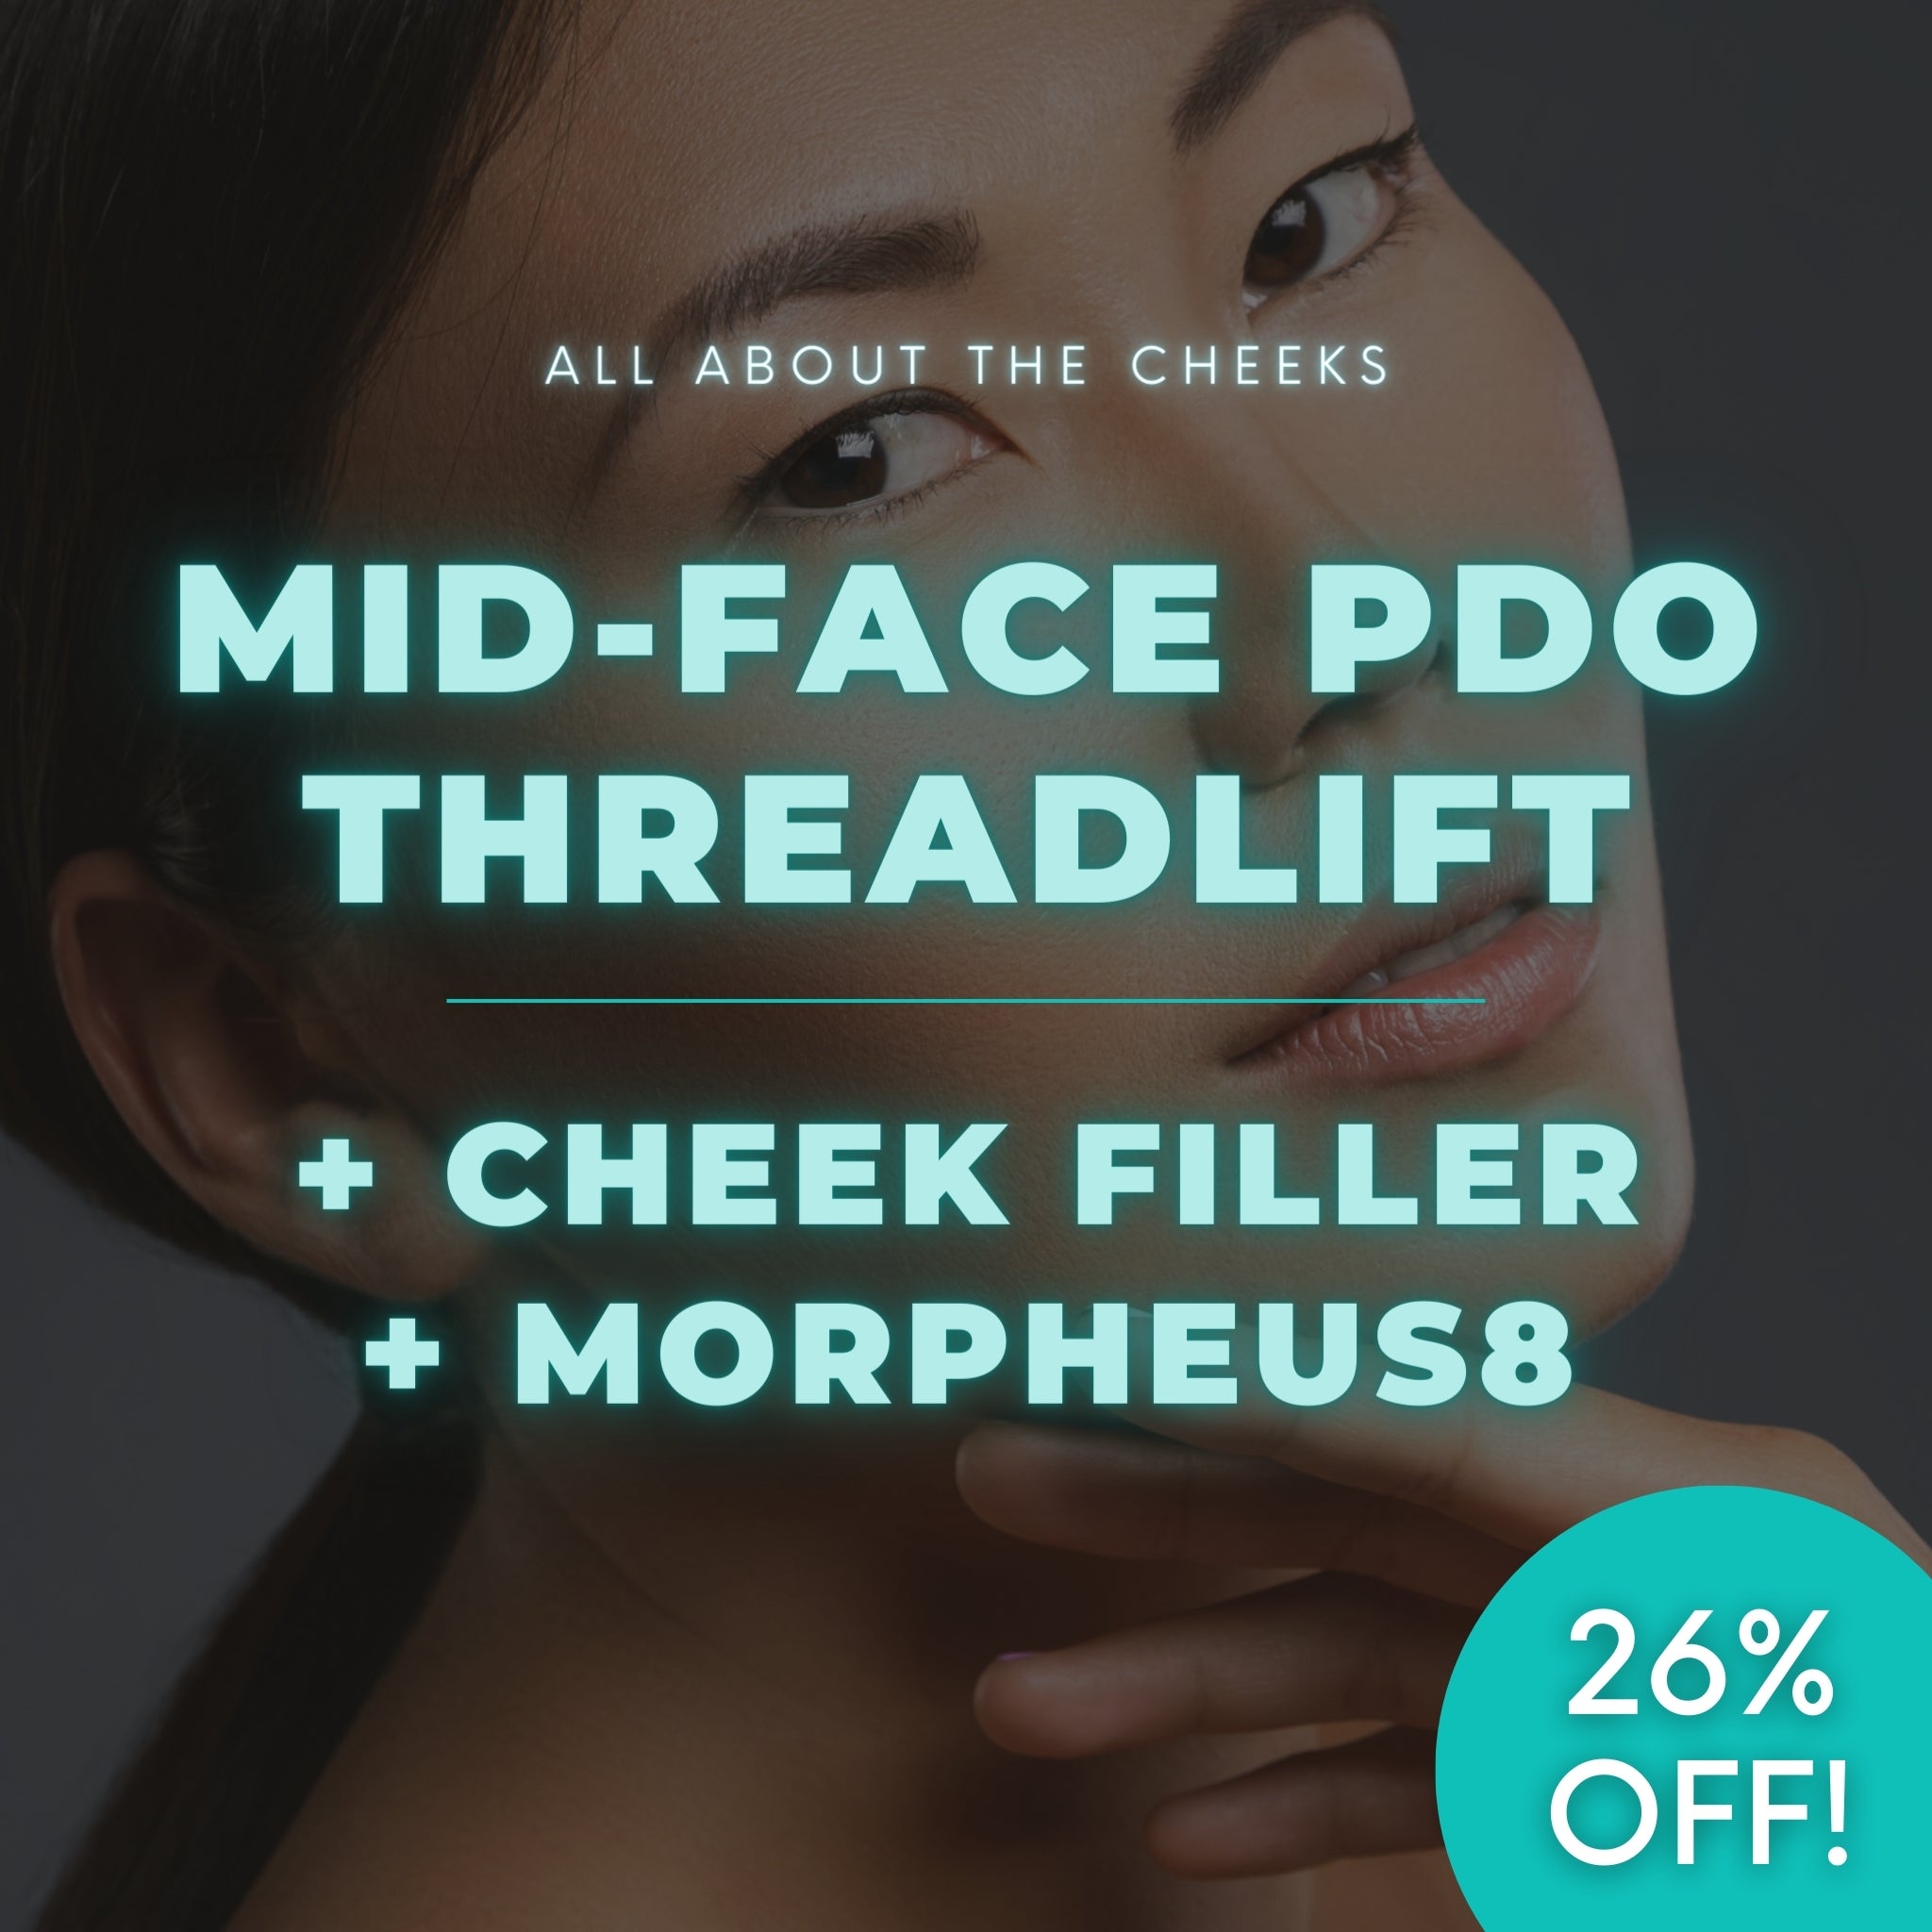 All About The Cheeks | Mid-Face PDO Threadlift, 2 Syringes Restylane + 1 Full Face Morpheus8